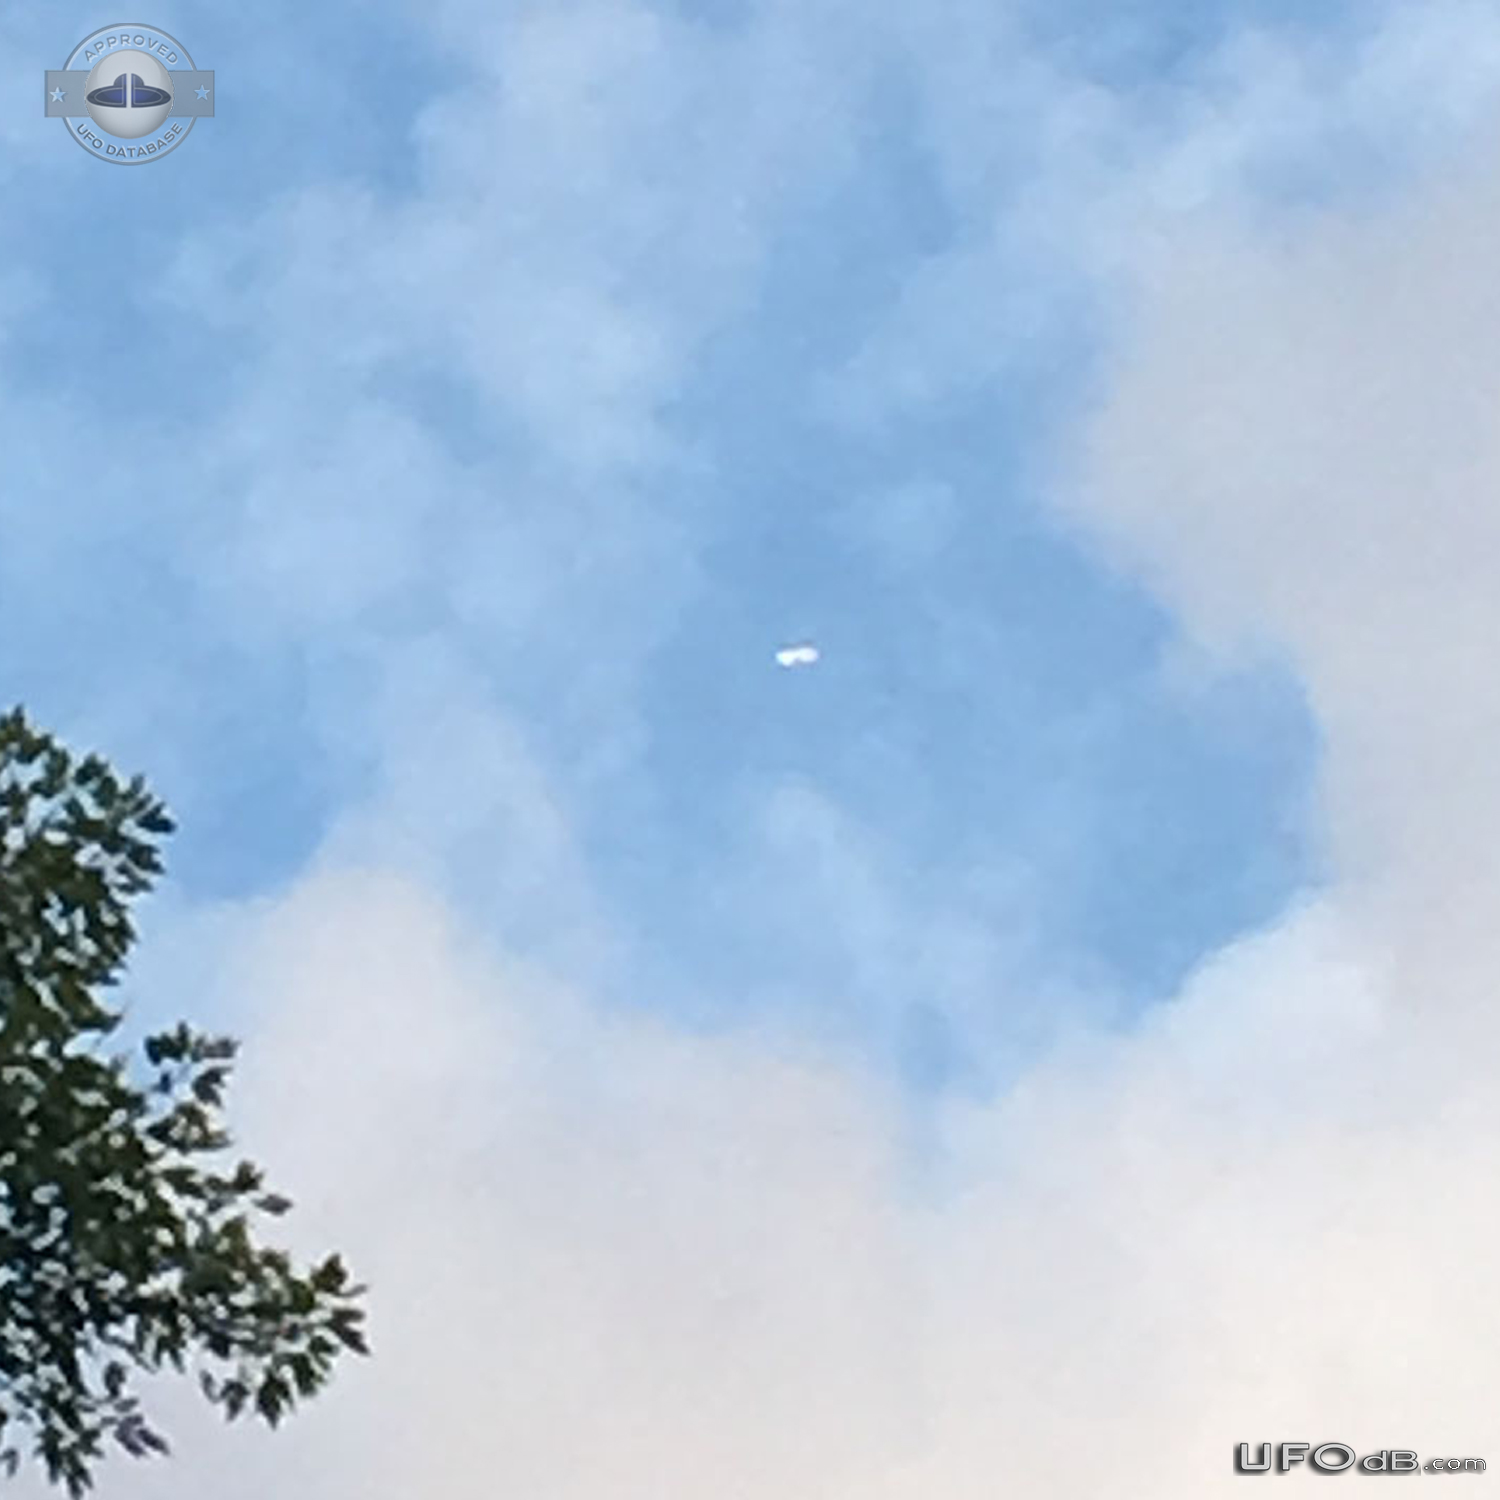 I saw a shiny cigar shaped Ufo in descent through the clouds - Tenness UFO Picture #795-2